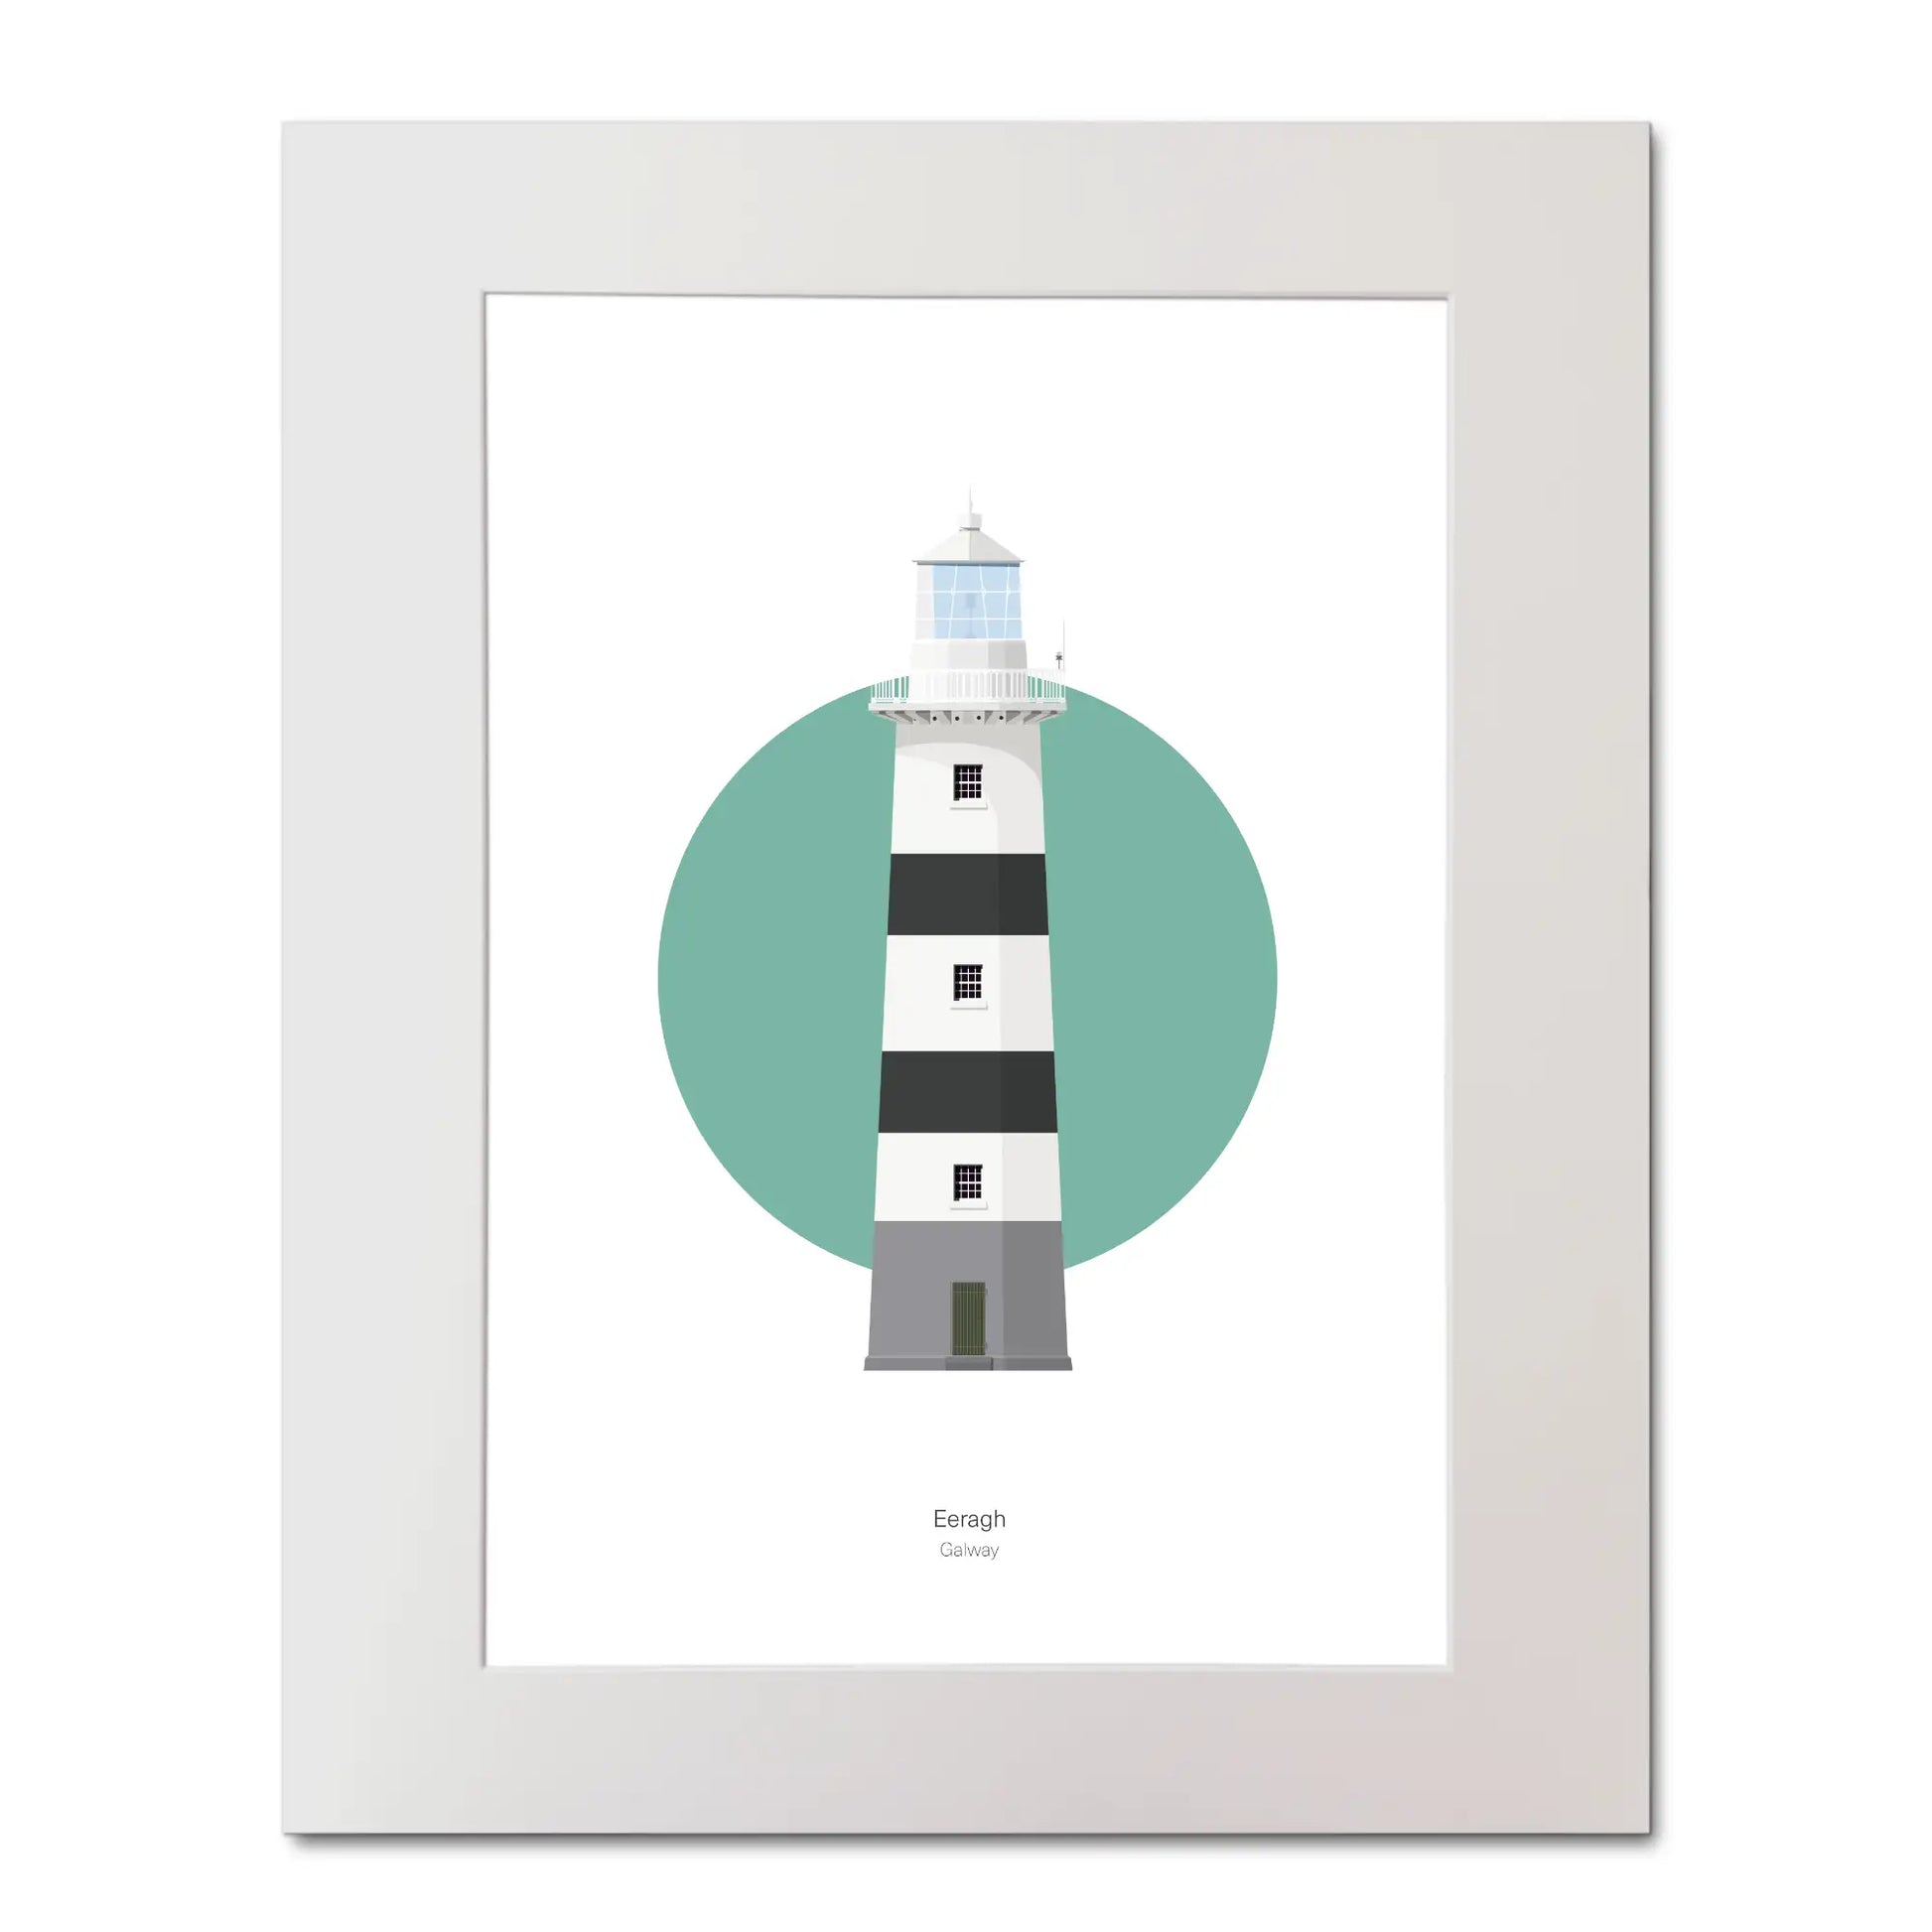 Contemporary illustration of Eeragh lighthouse on a white background inside light blue square, mounted and measuring 40x50cm.